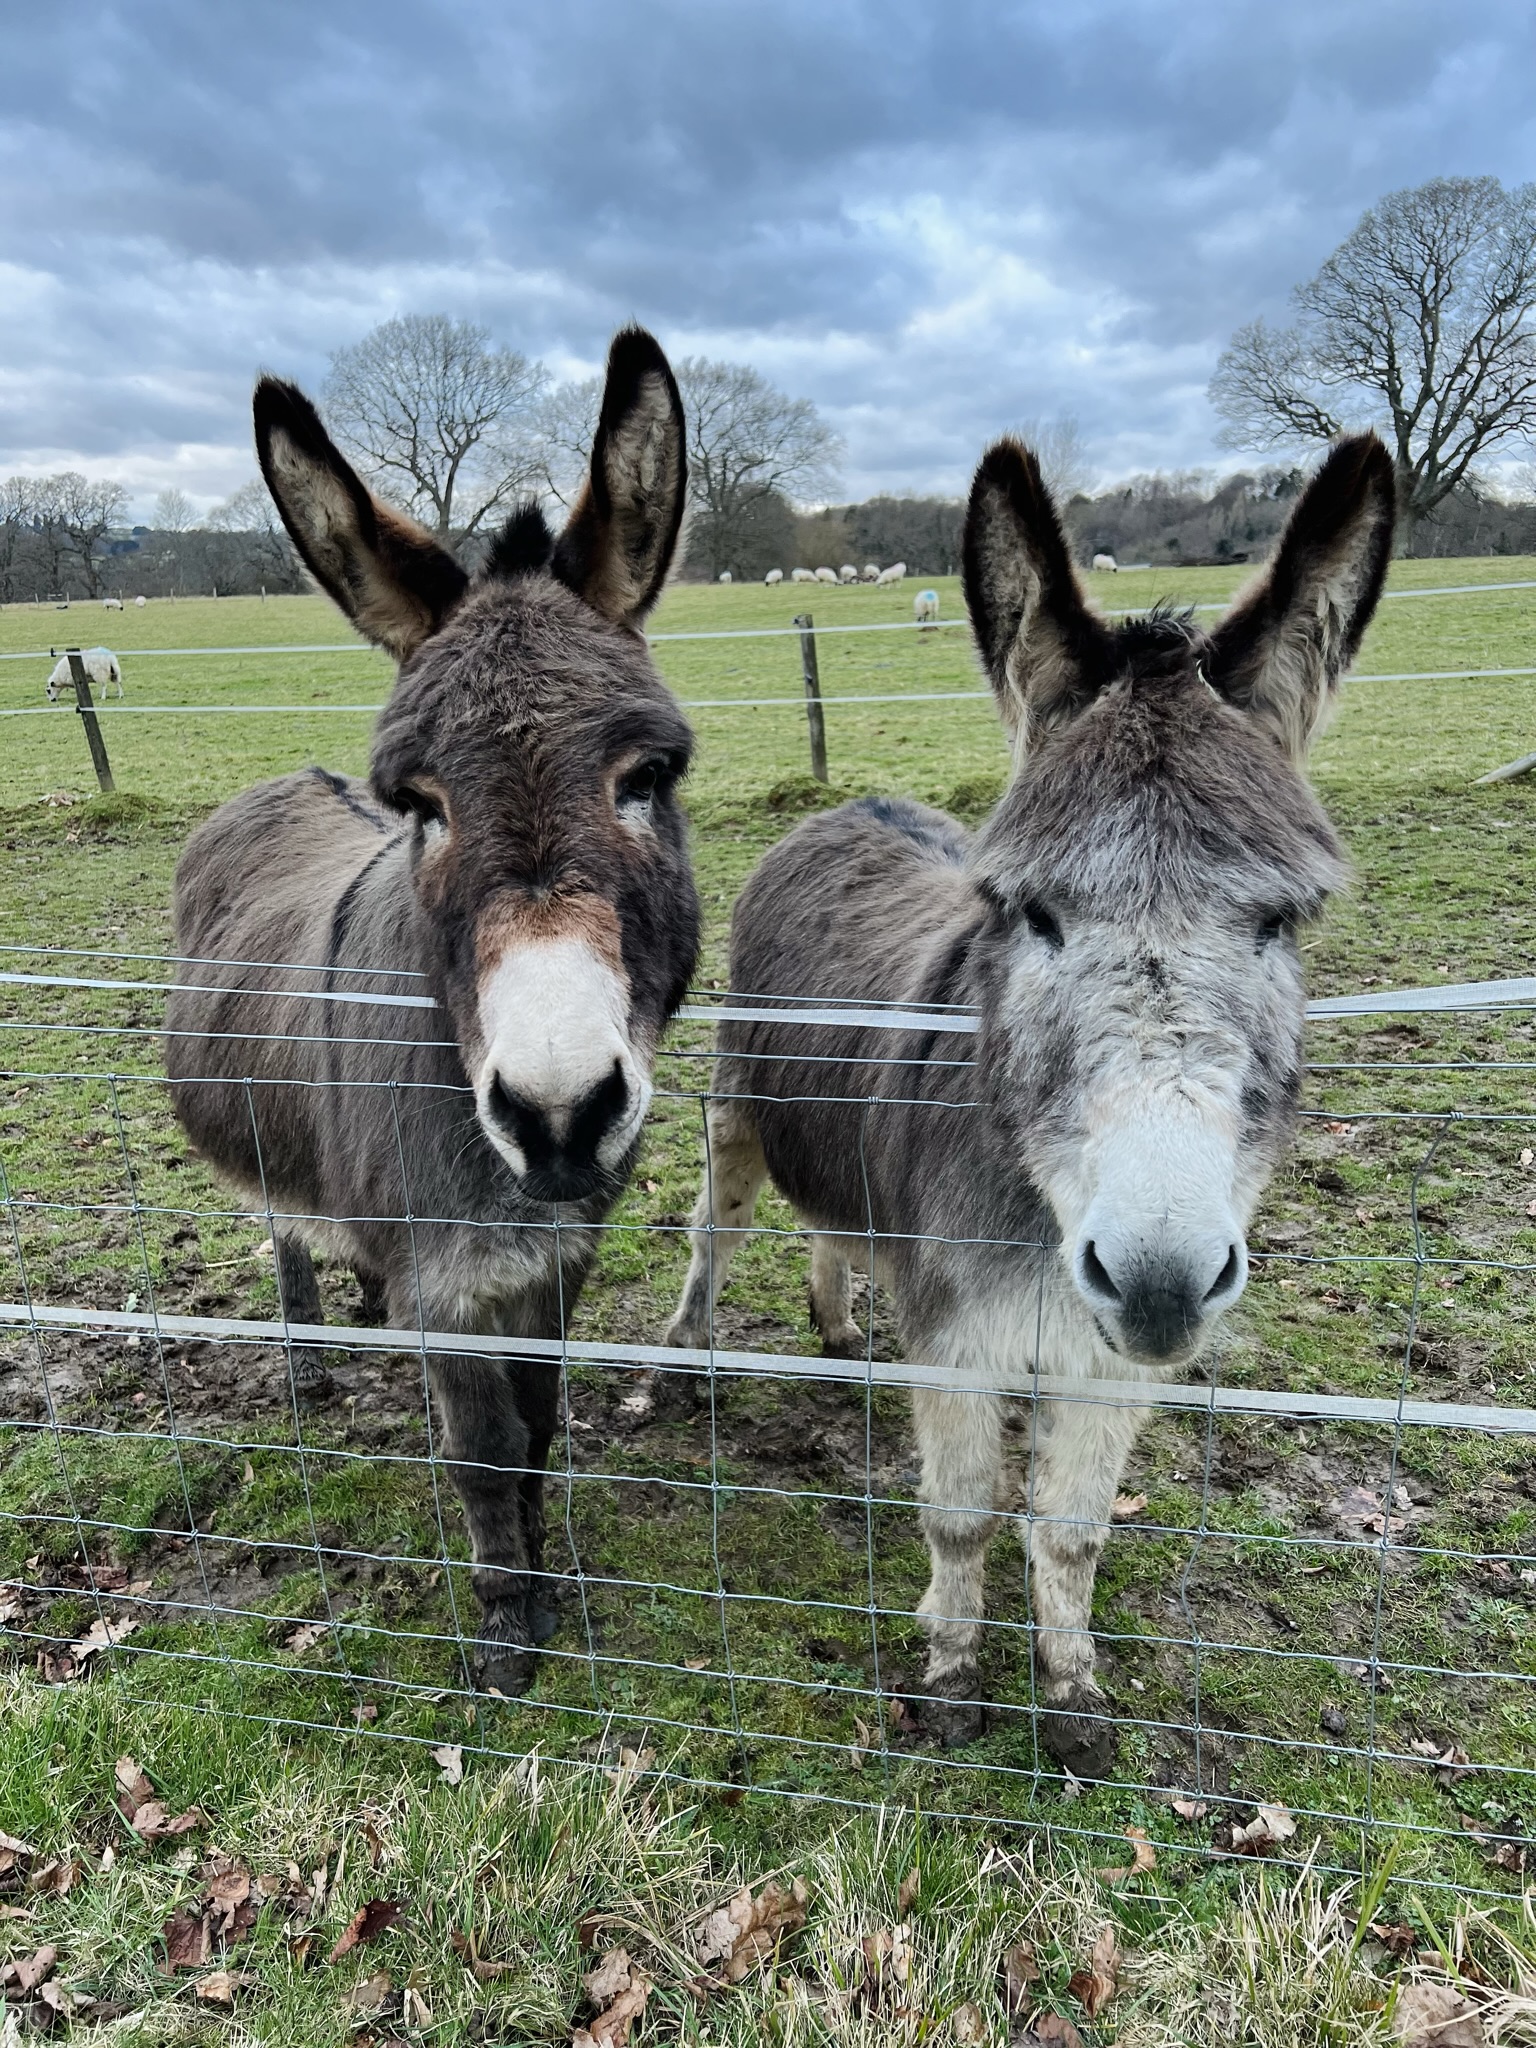 Our two donkeys Giles and Winston